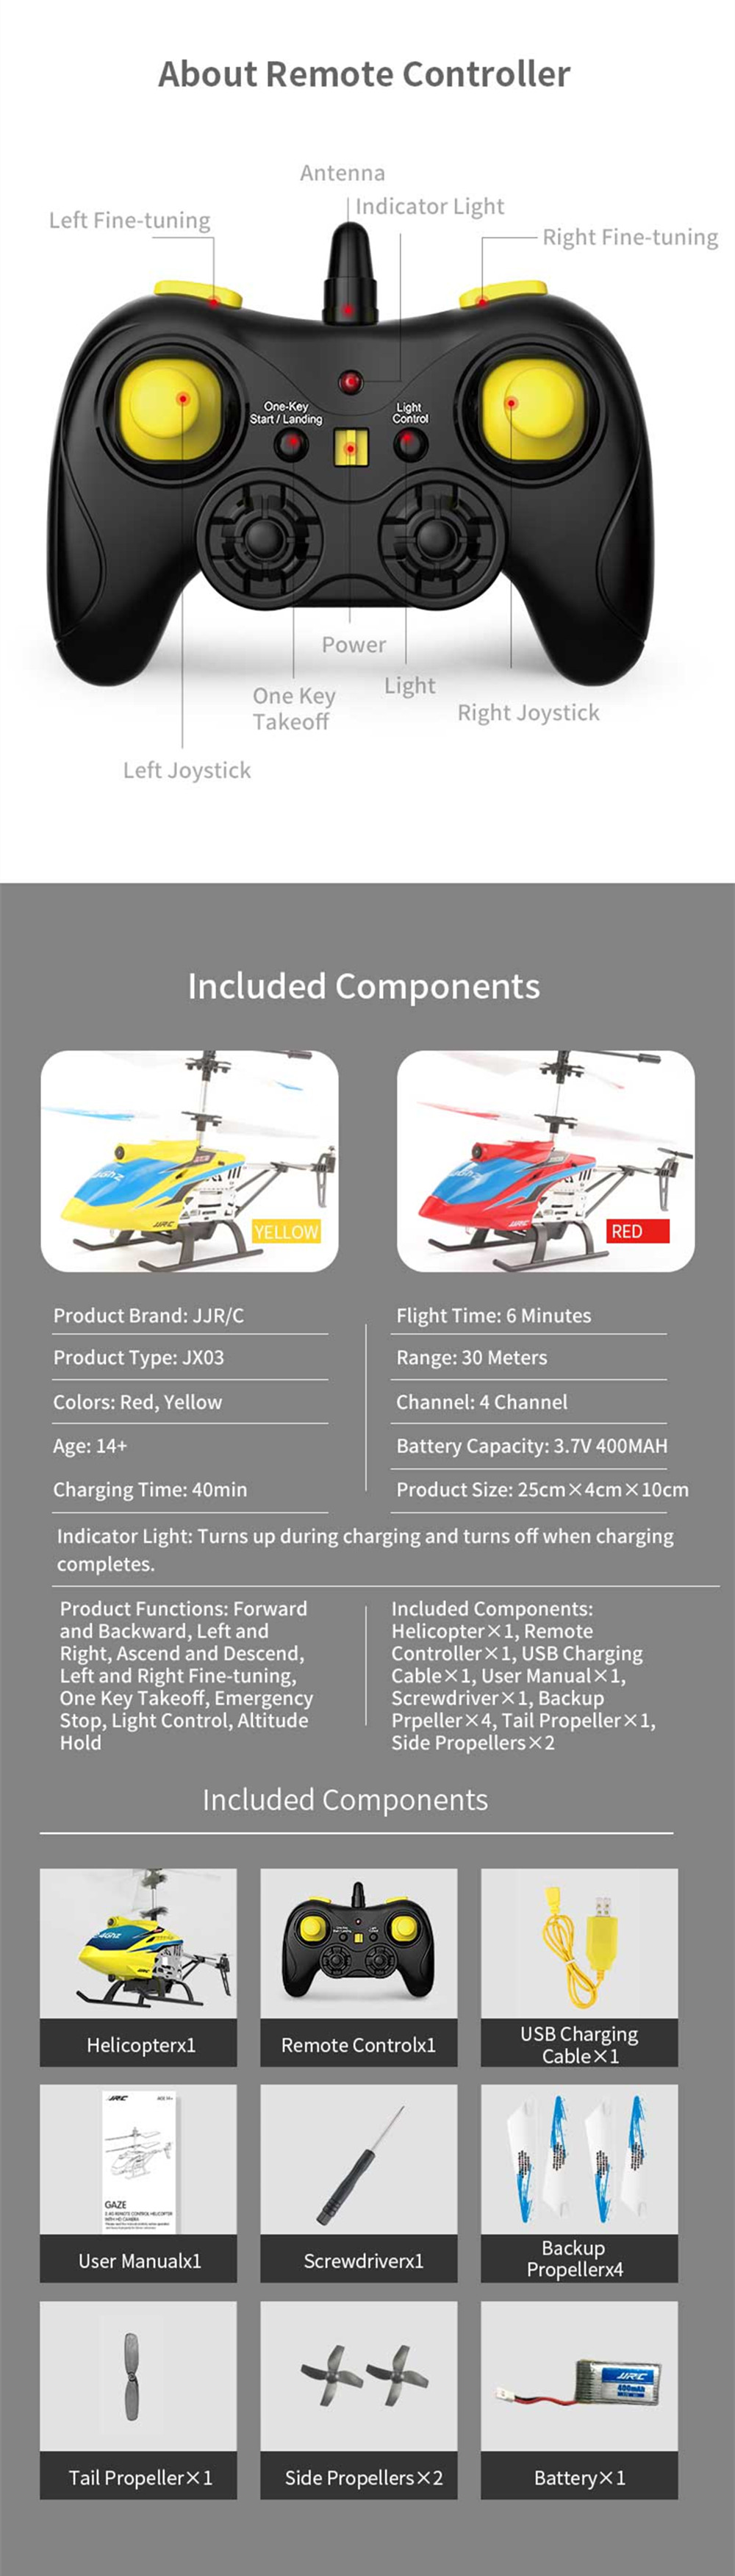 JJRC GAZE JX03 2.4G 4CH Altitude Hold Hover One-key Takeoff RC Helicopter RTF With 720P HD Camera - Photo: 5